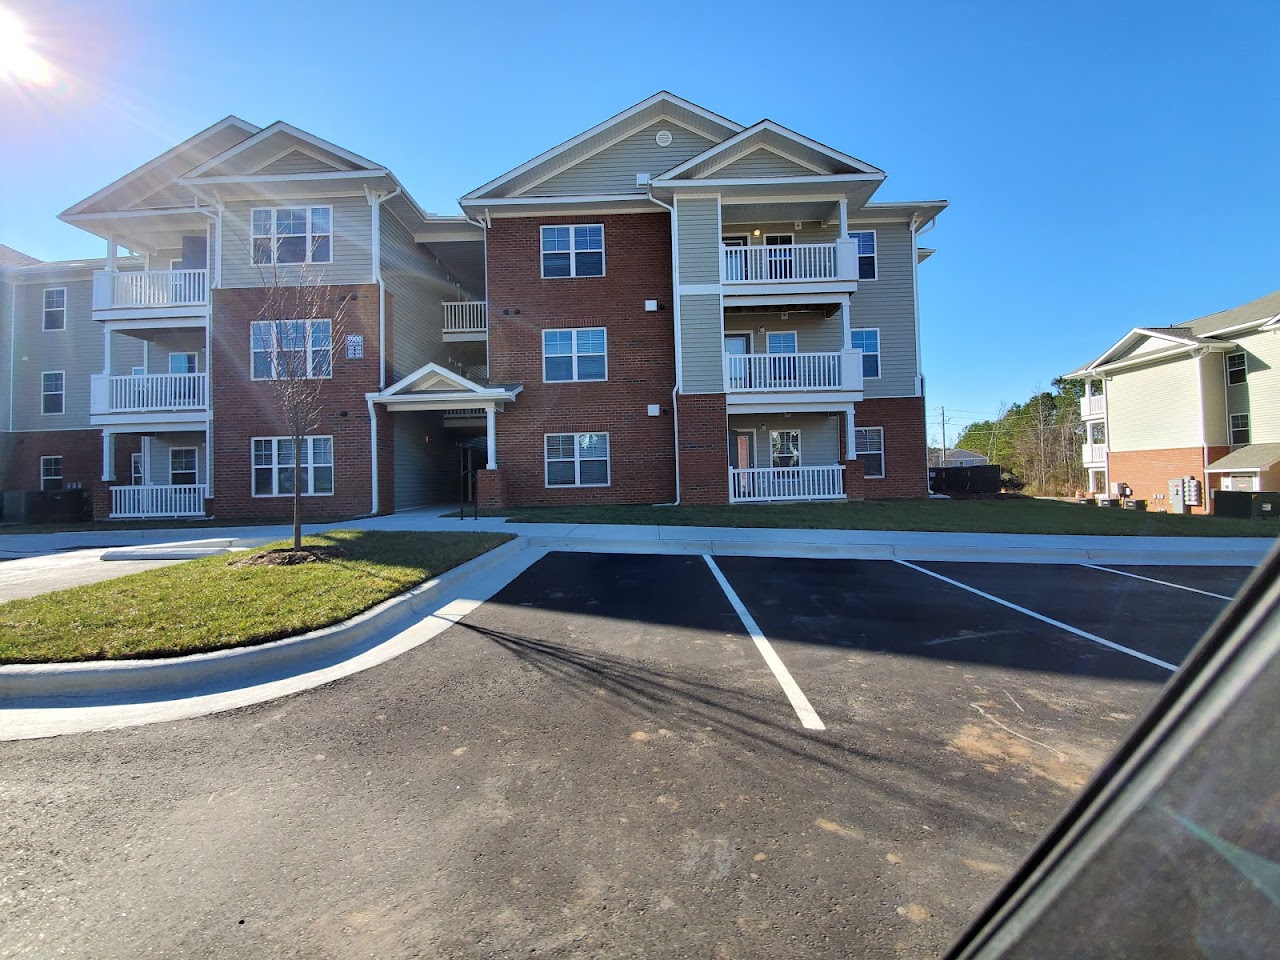 Photo of QUARRY TRACE. Affordable housing located at 3700 QUARRY TRACE DR RALEIGH, NC 27610